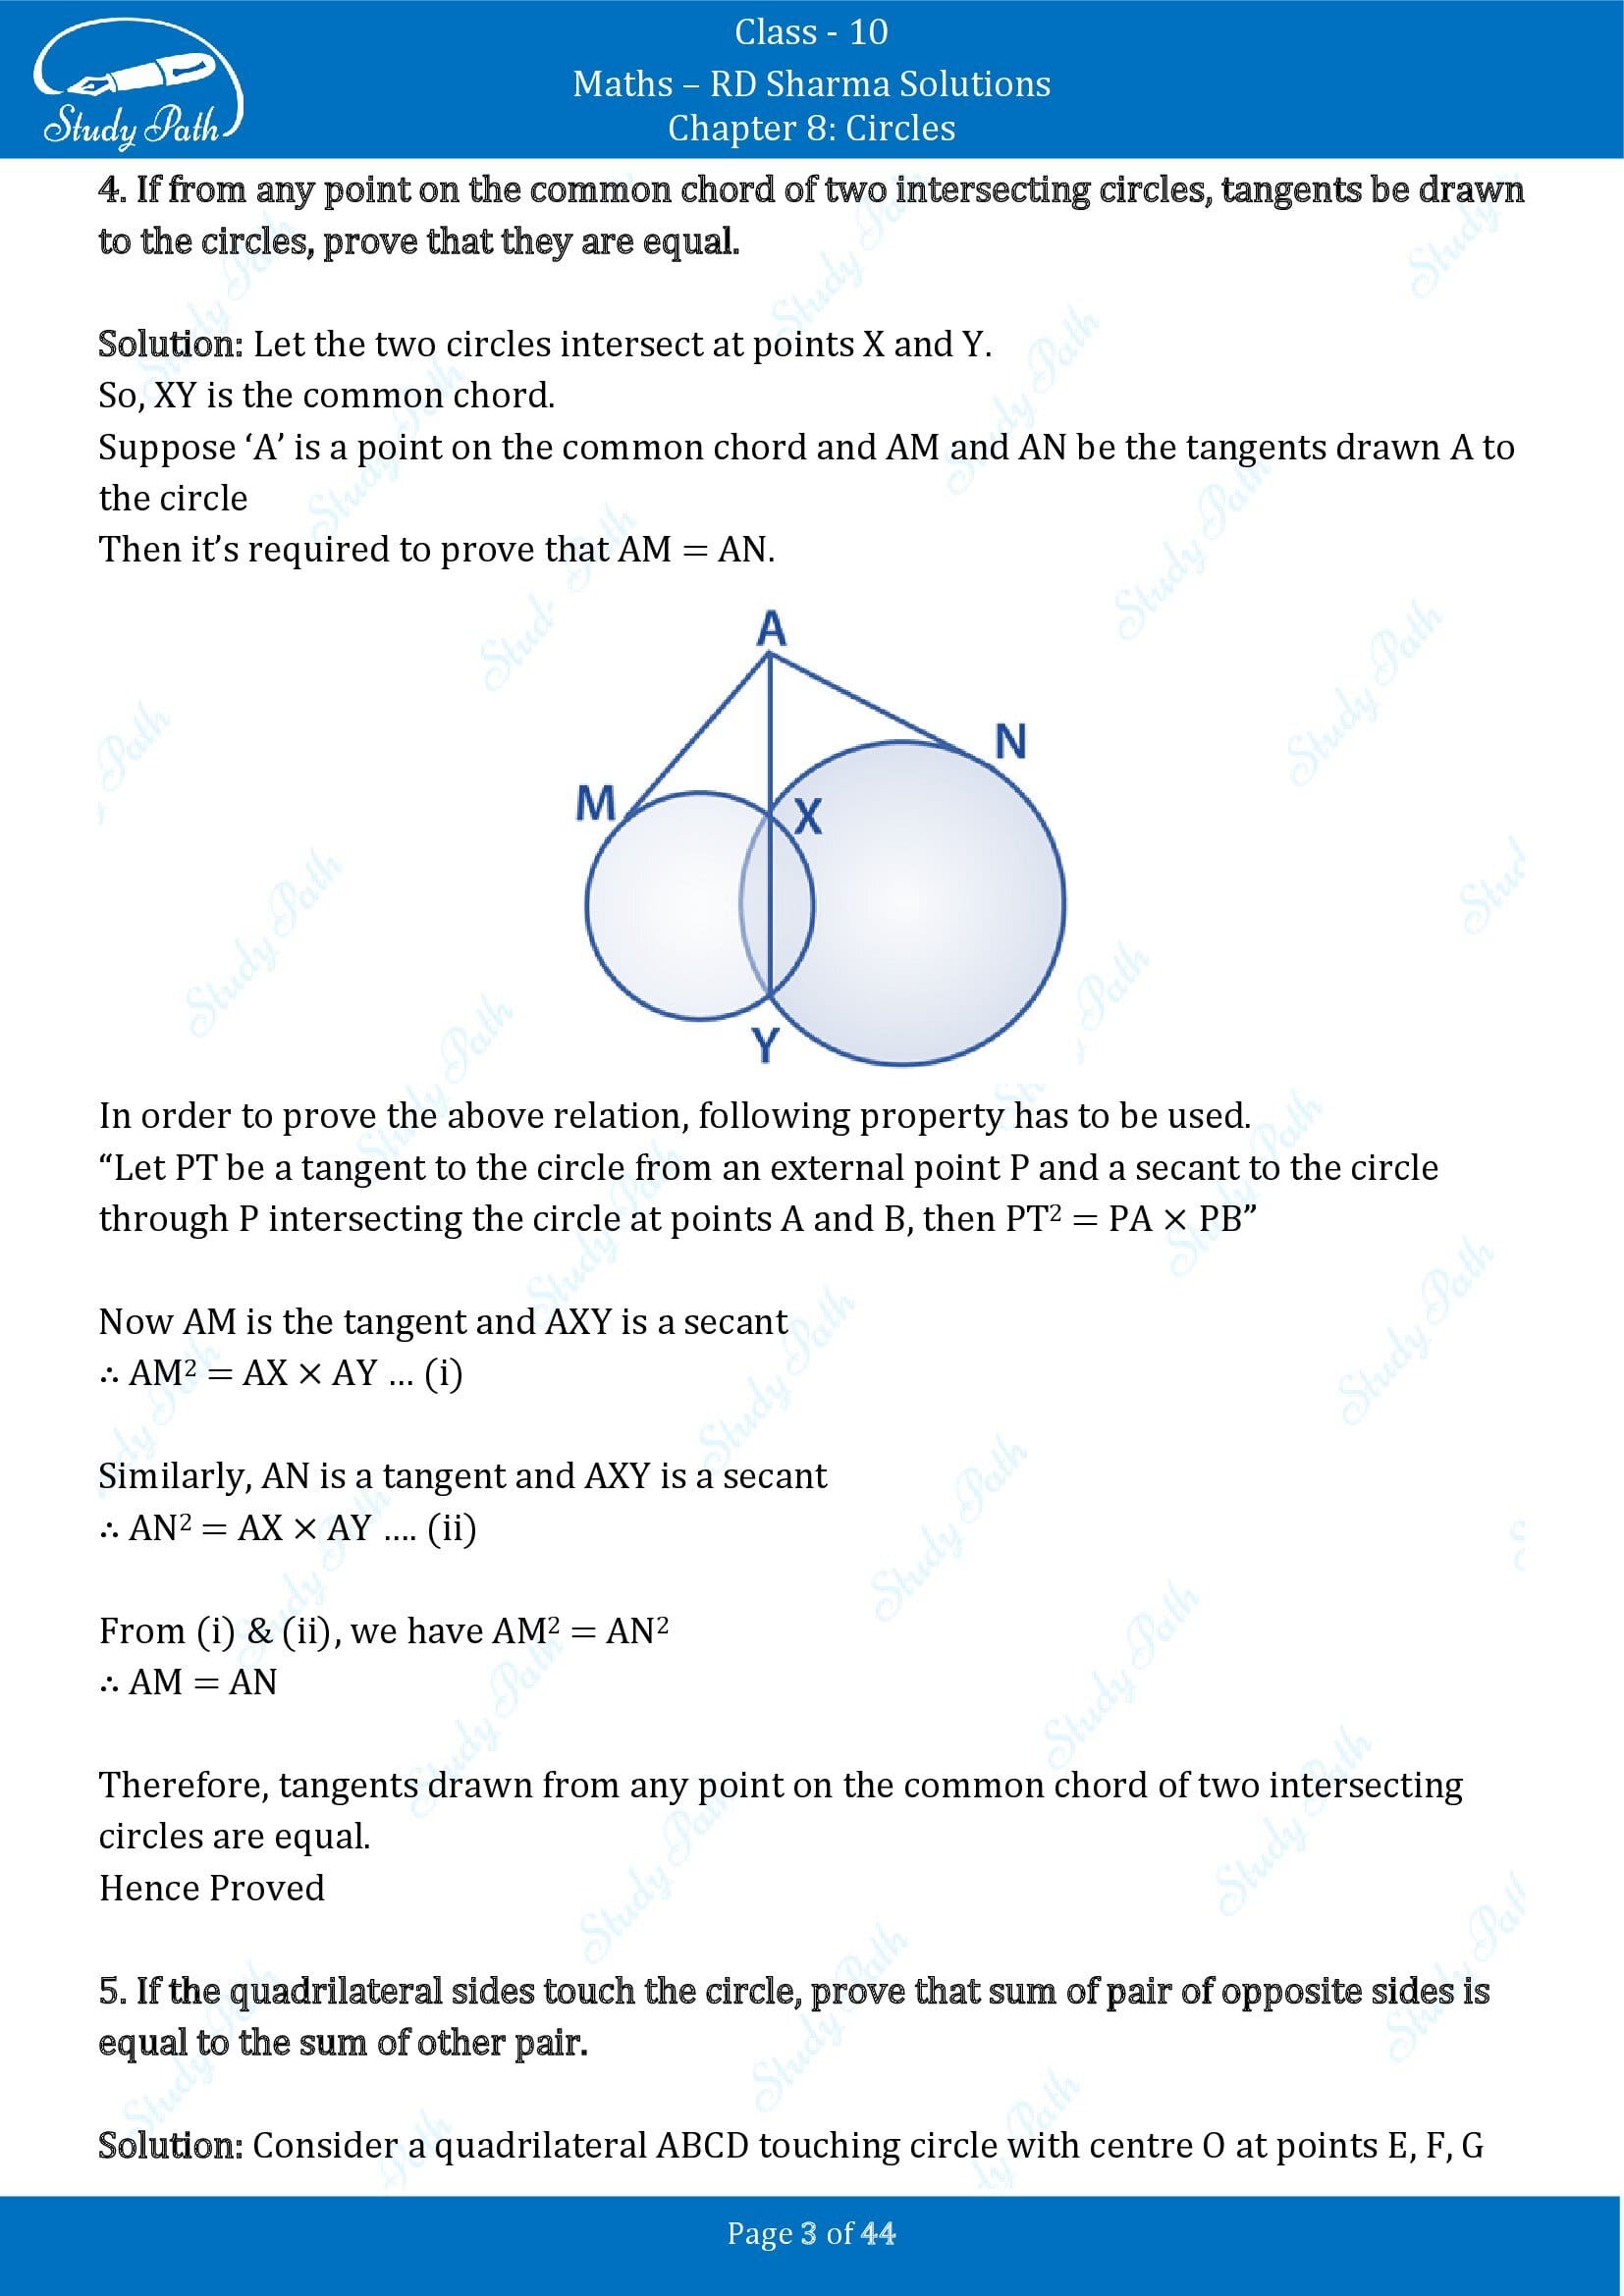 RD Sharma Solutions Class 10 Chapter 8 Circles Exercise 8.2 00003